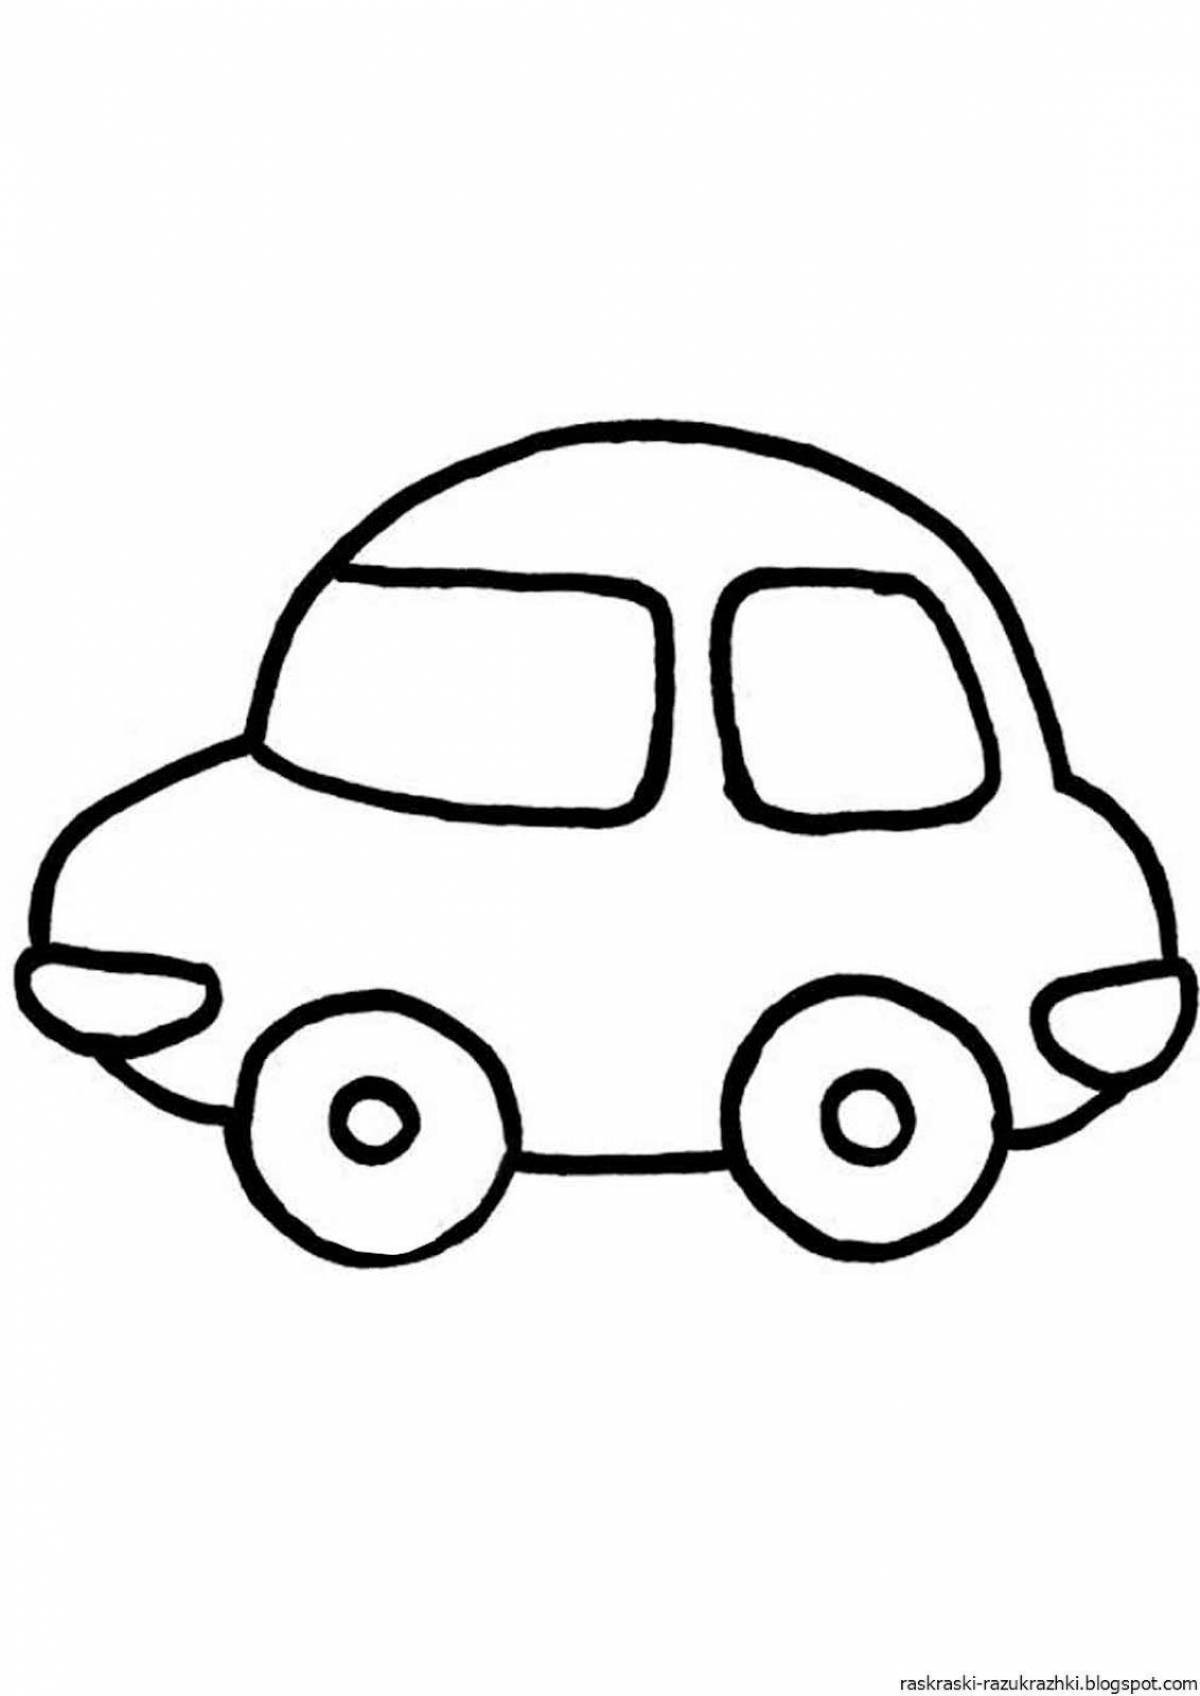 Amazing car drawing for kids